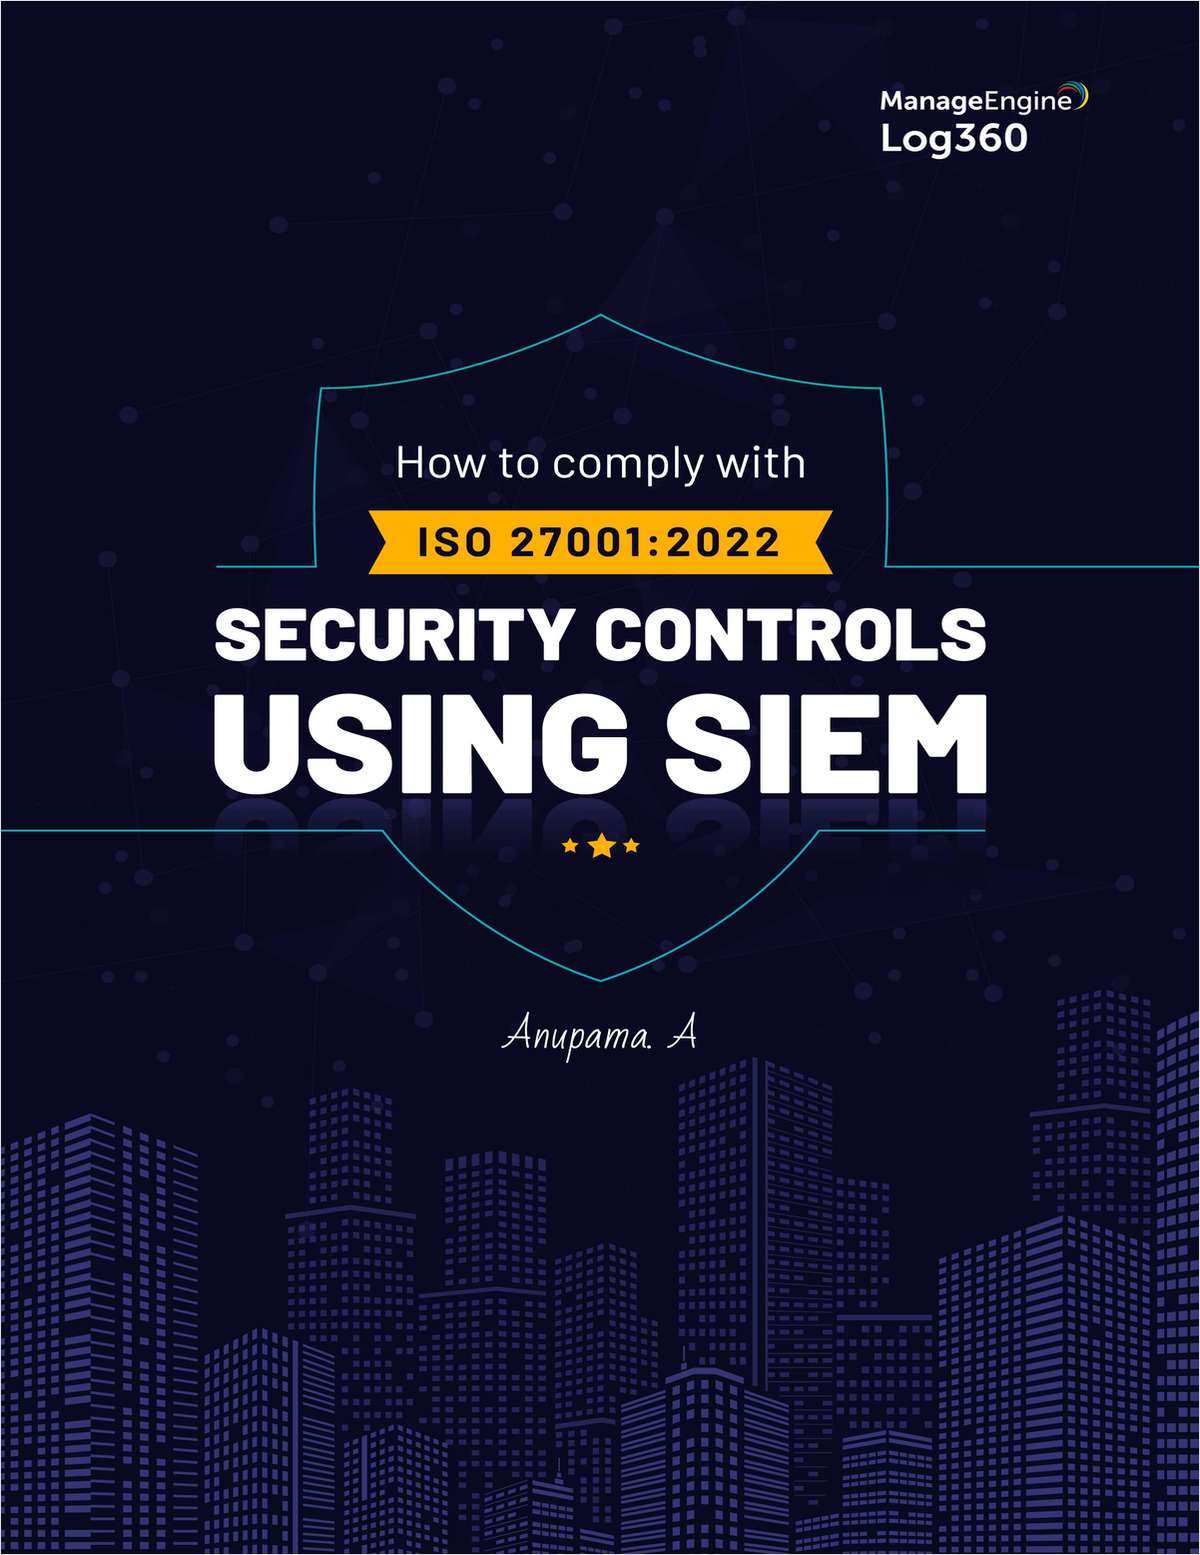 How to comply with iso 27001:2022 security controls using siem